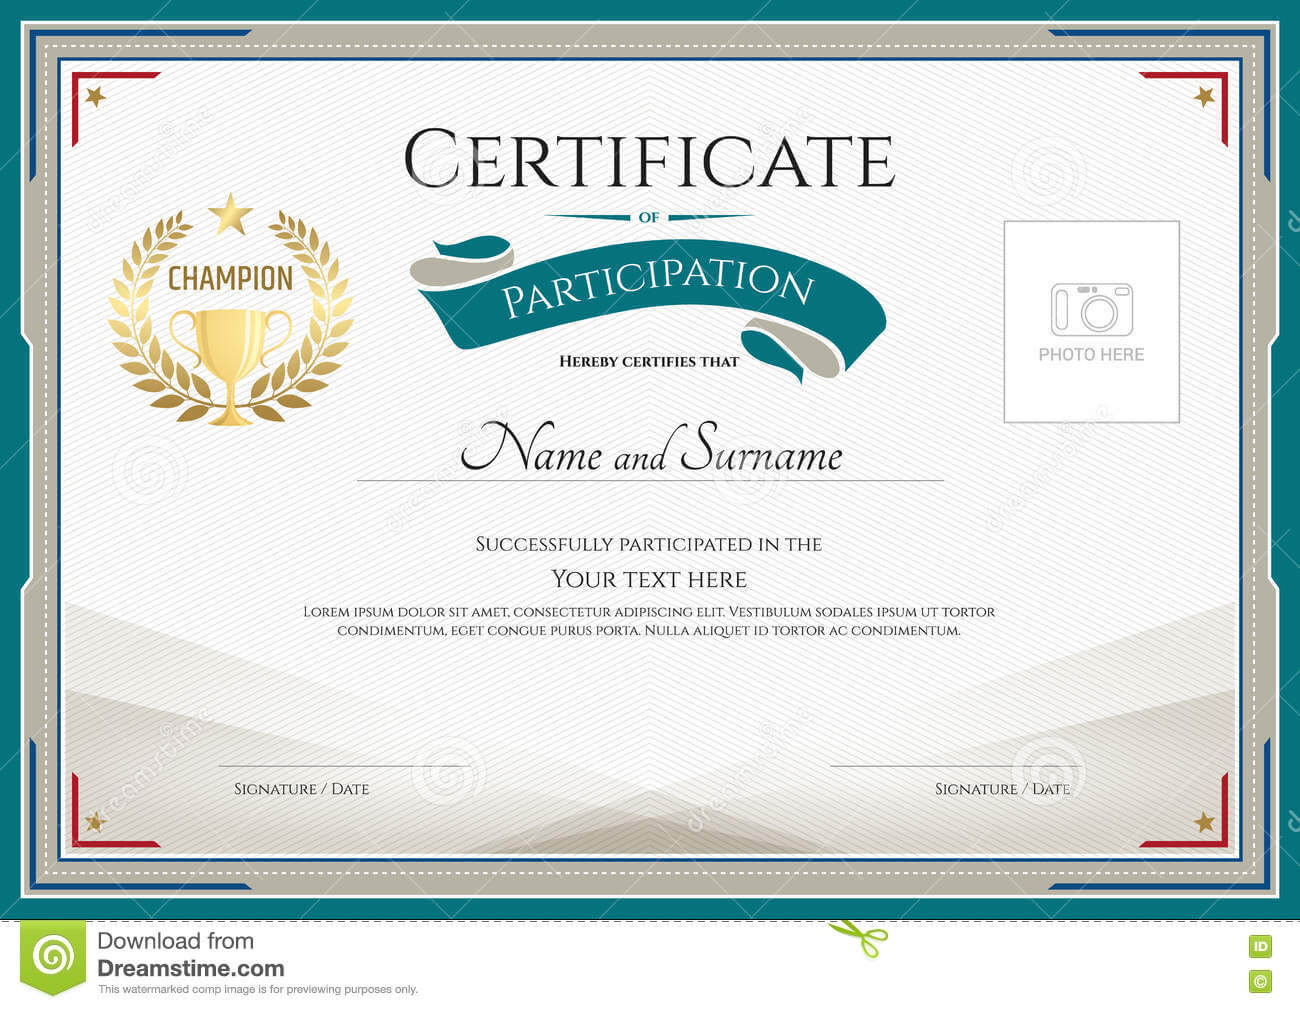 Certificate Of Participation Template With Green Broder Intended For Certificate Of Participation Template Word